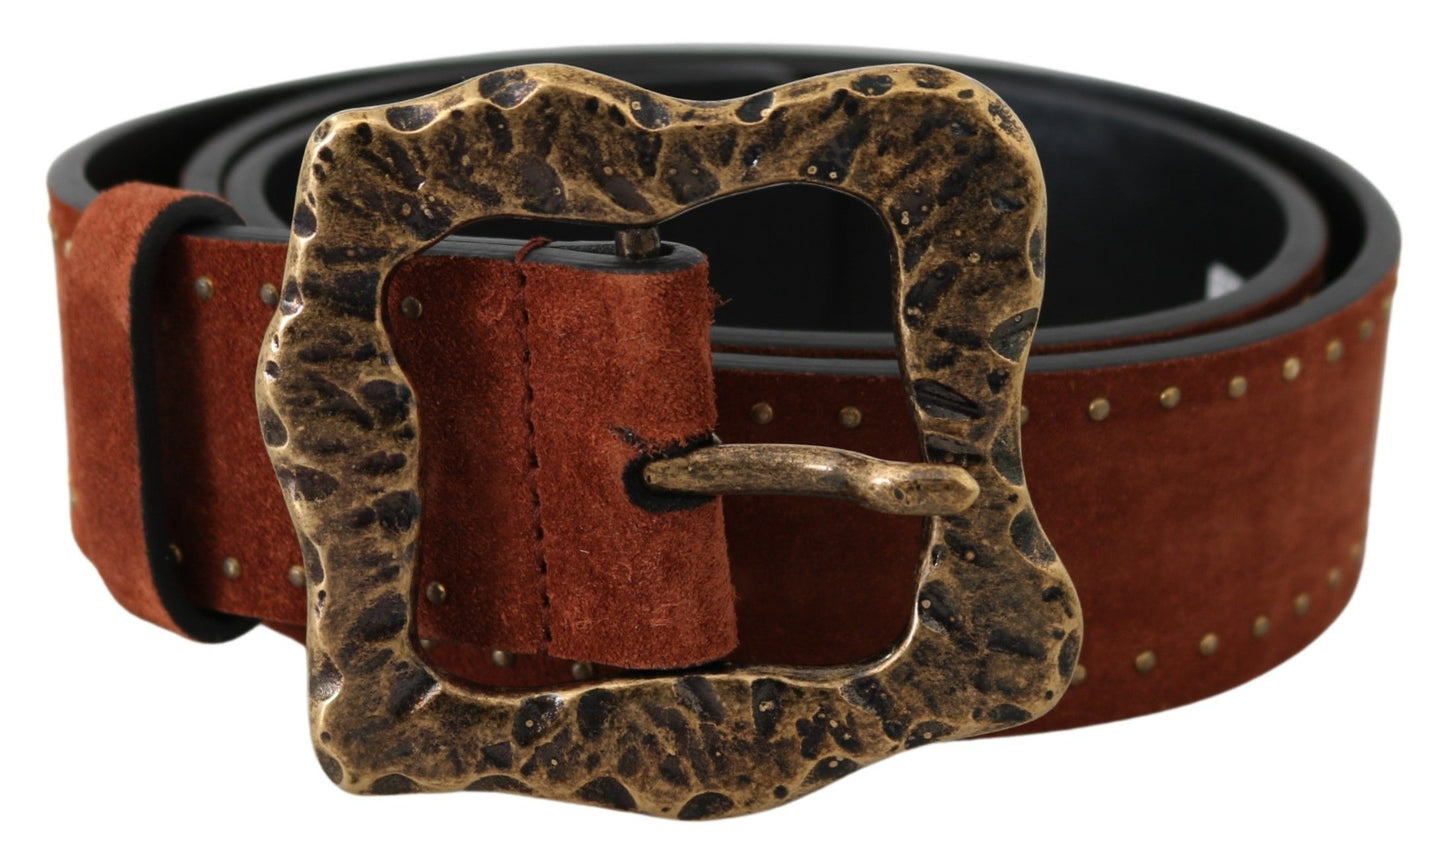 Dolce & Gabbana Elegant Suede Leather Belt with Gold Studs